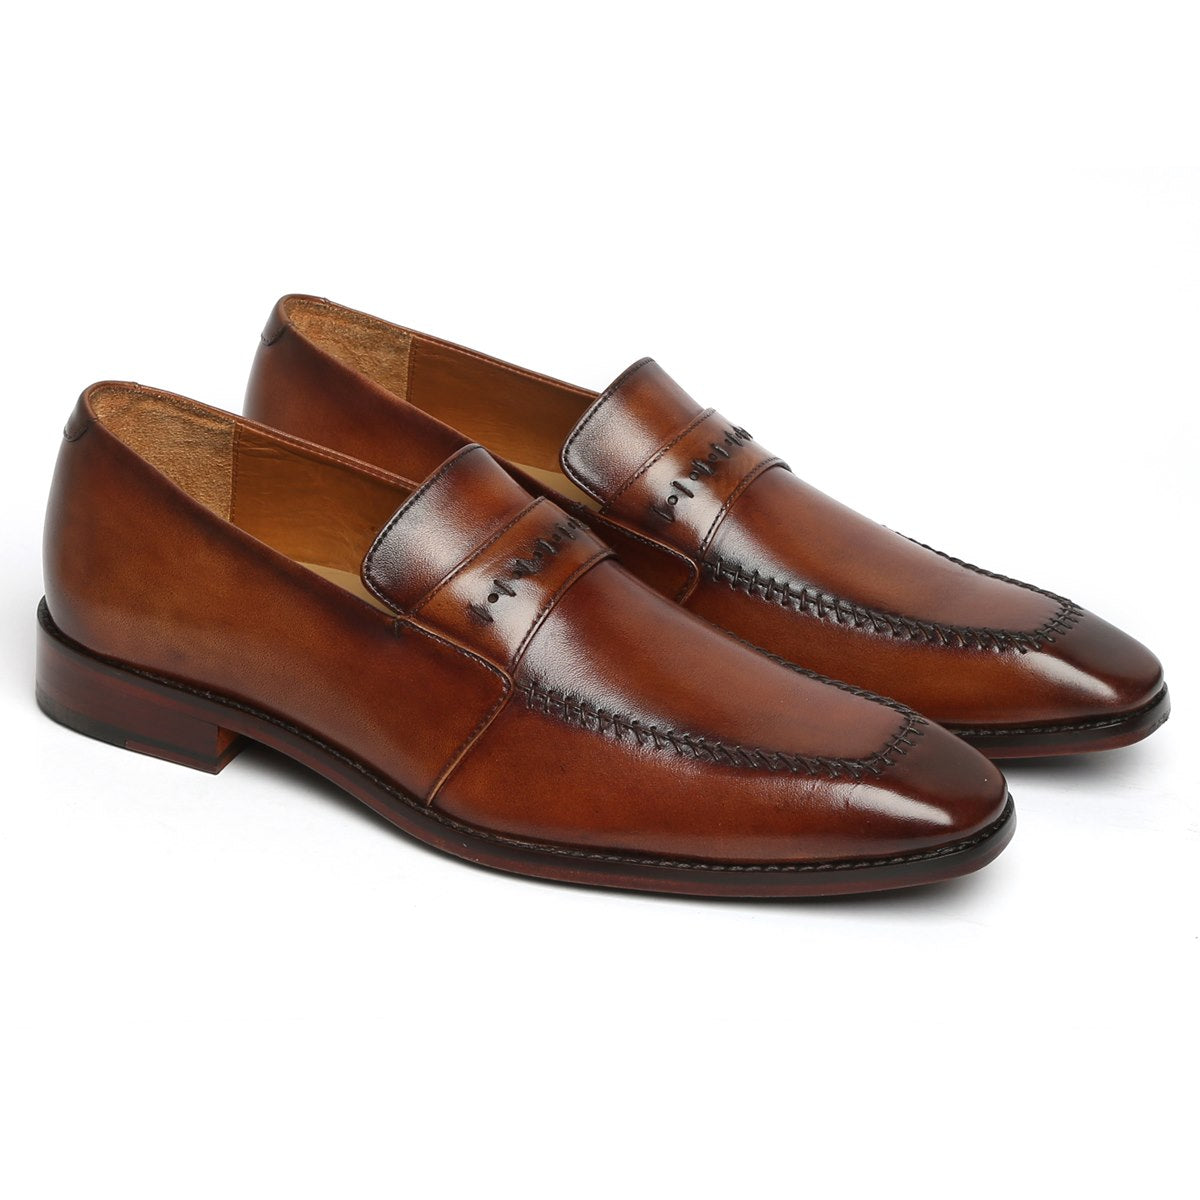 Cognac Stitched Design Apron Toe Leather Penny Loafers with Leather So